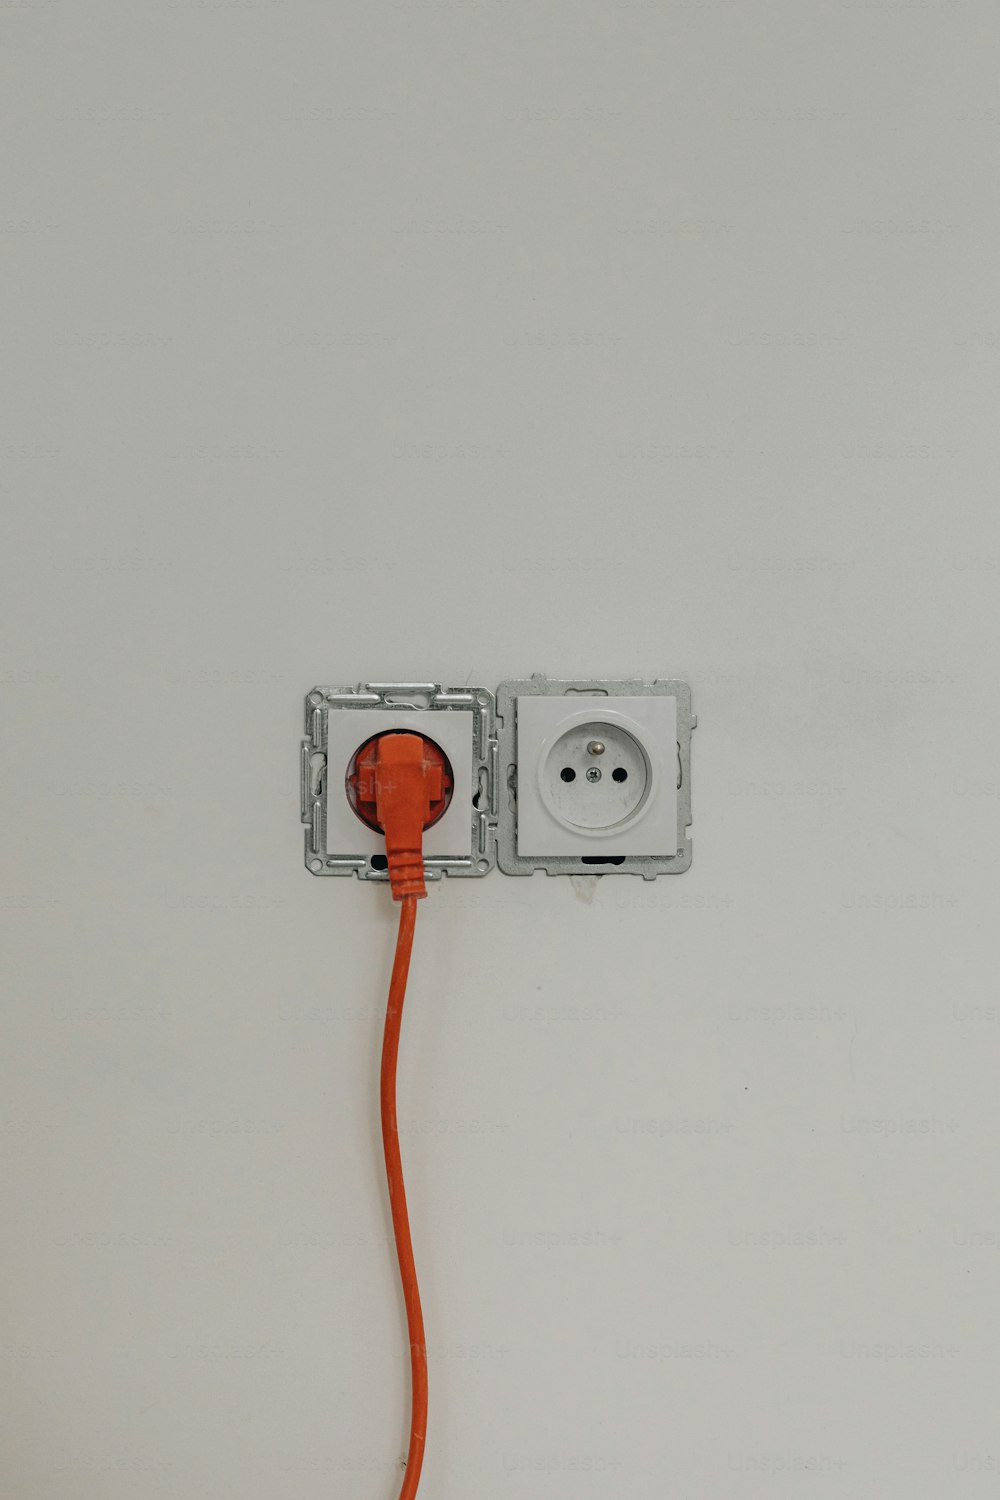 an orange cord plugged into a white wall outlet